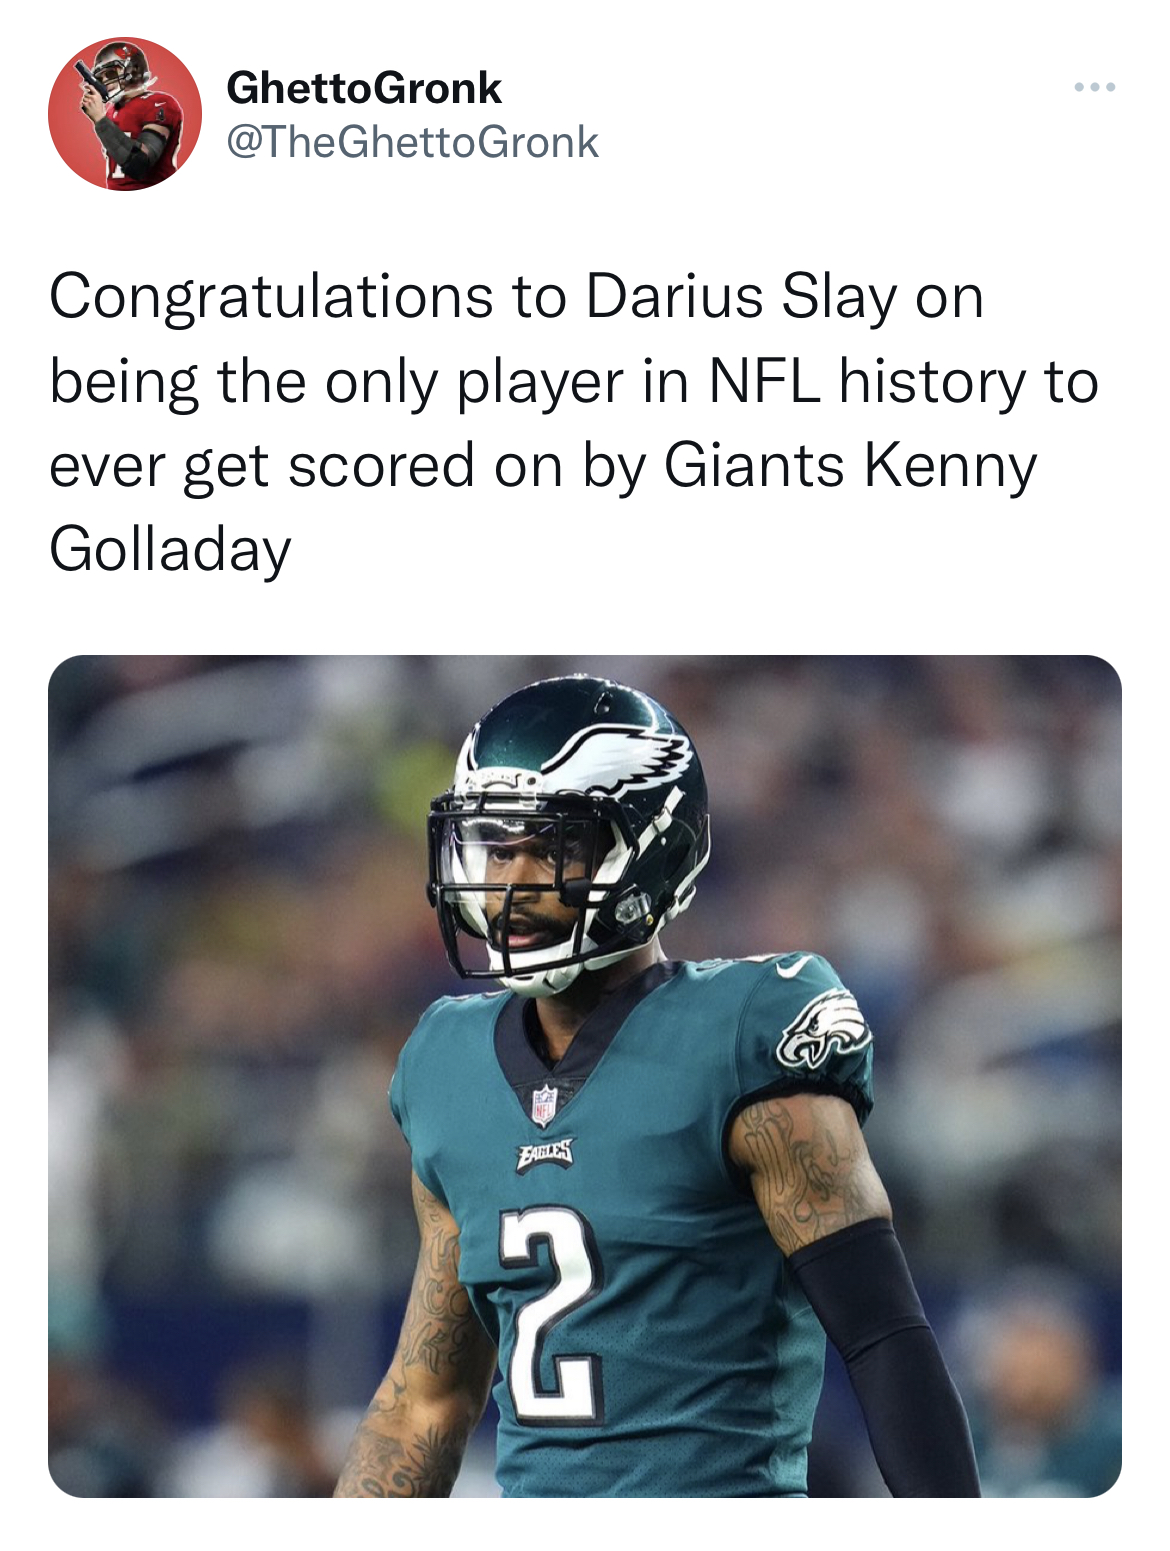 Tweets dunking on celebs - darius slay eagles - Ghetto Gronk Congratulations to Darius Slay on being the only player in Nfl history to ever get scored on by Giants Kenny Golladay Pats www 2